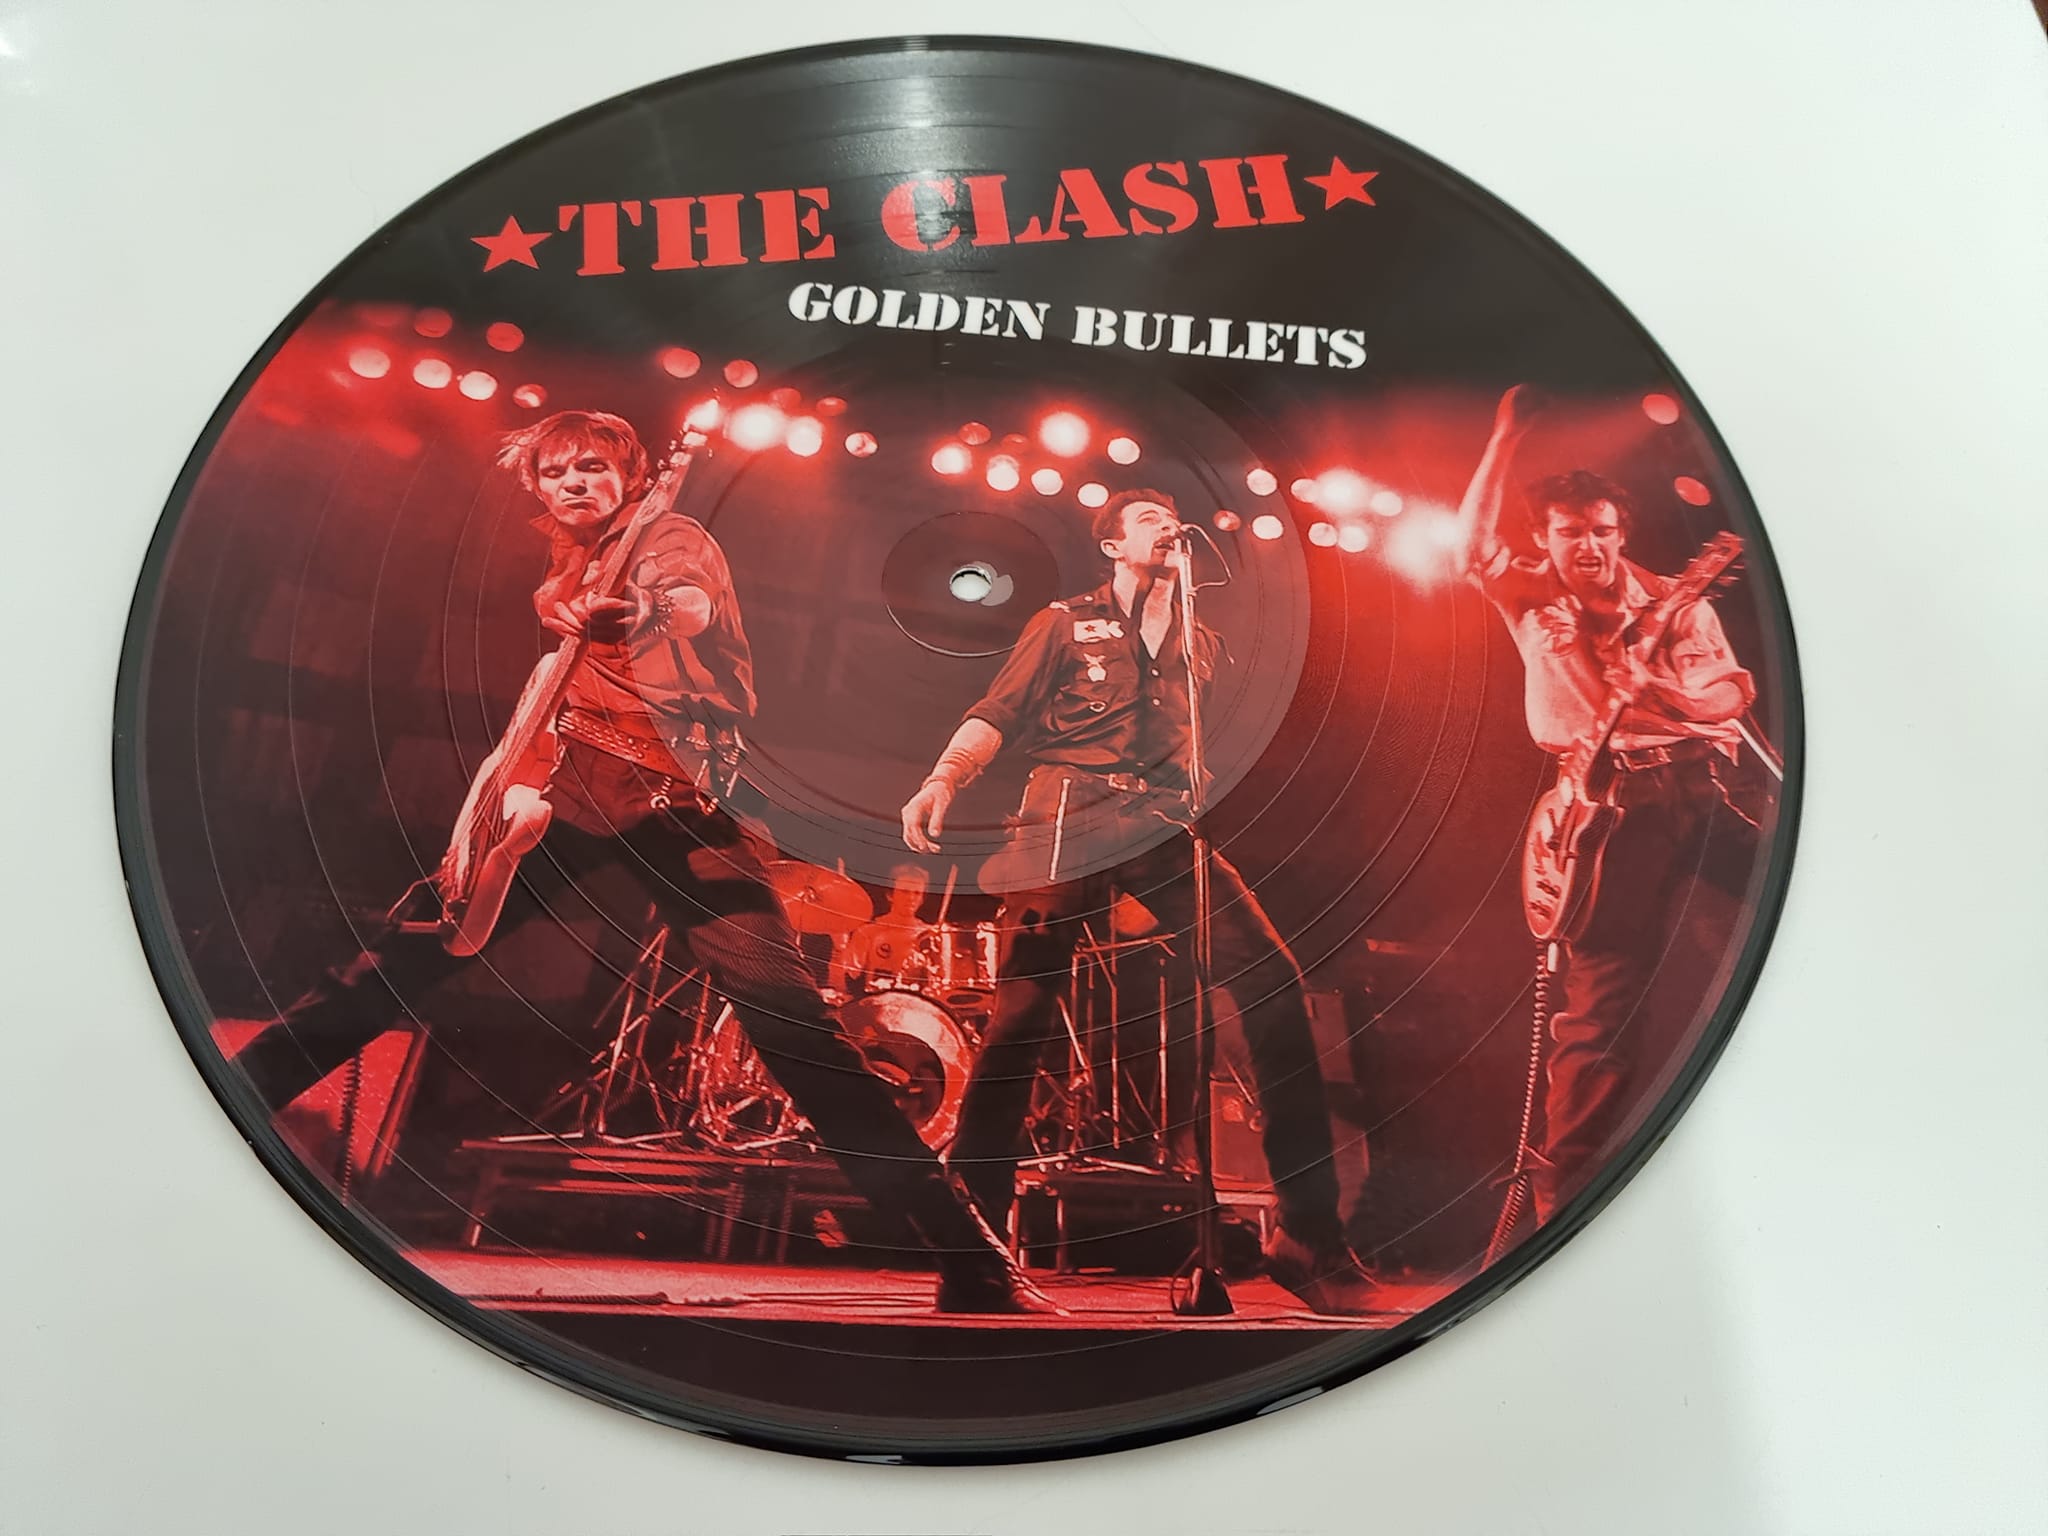 Buy this rare Clash record by clicking here